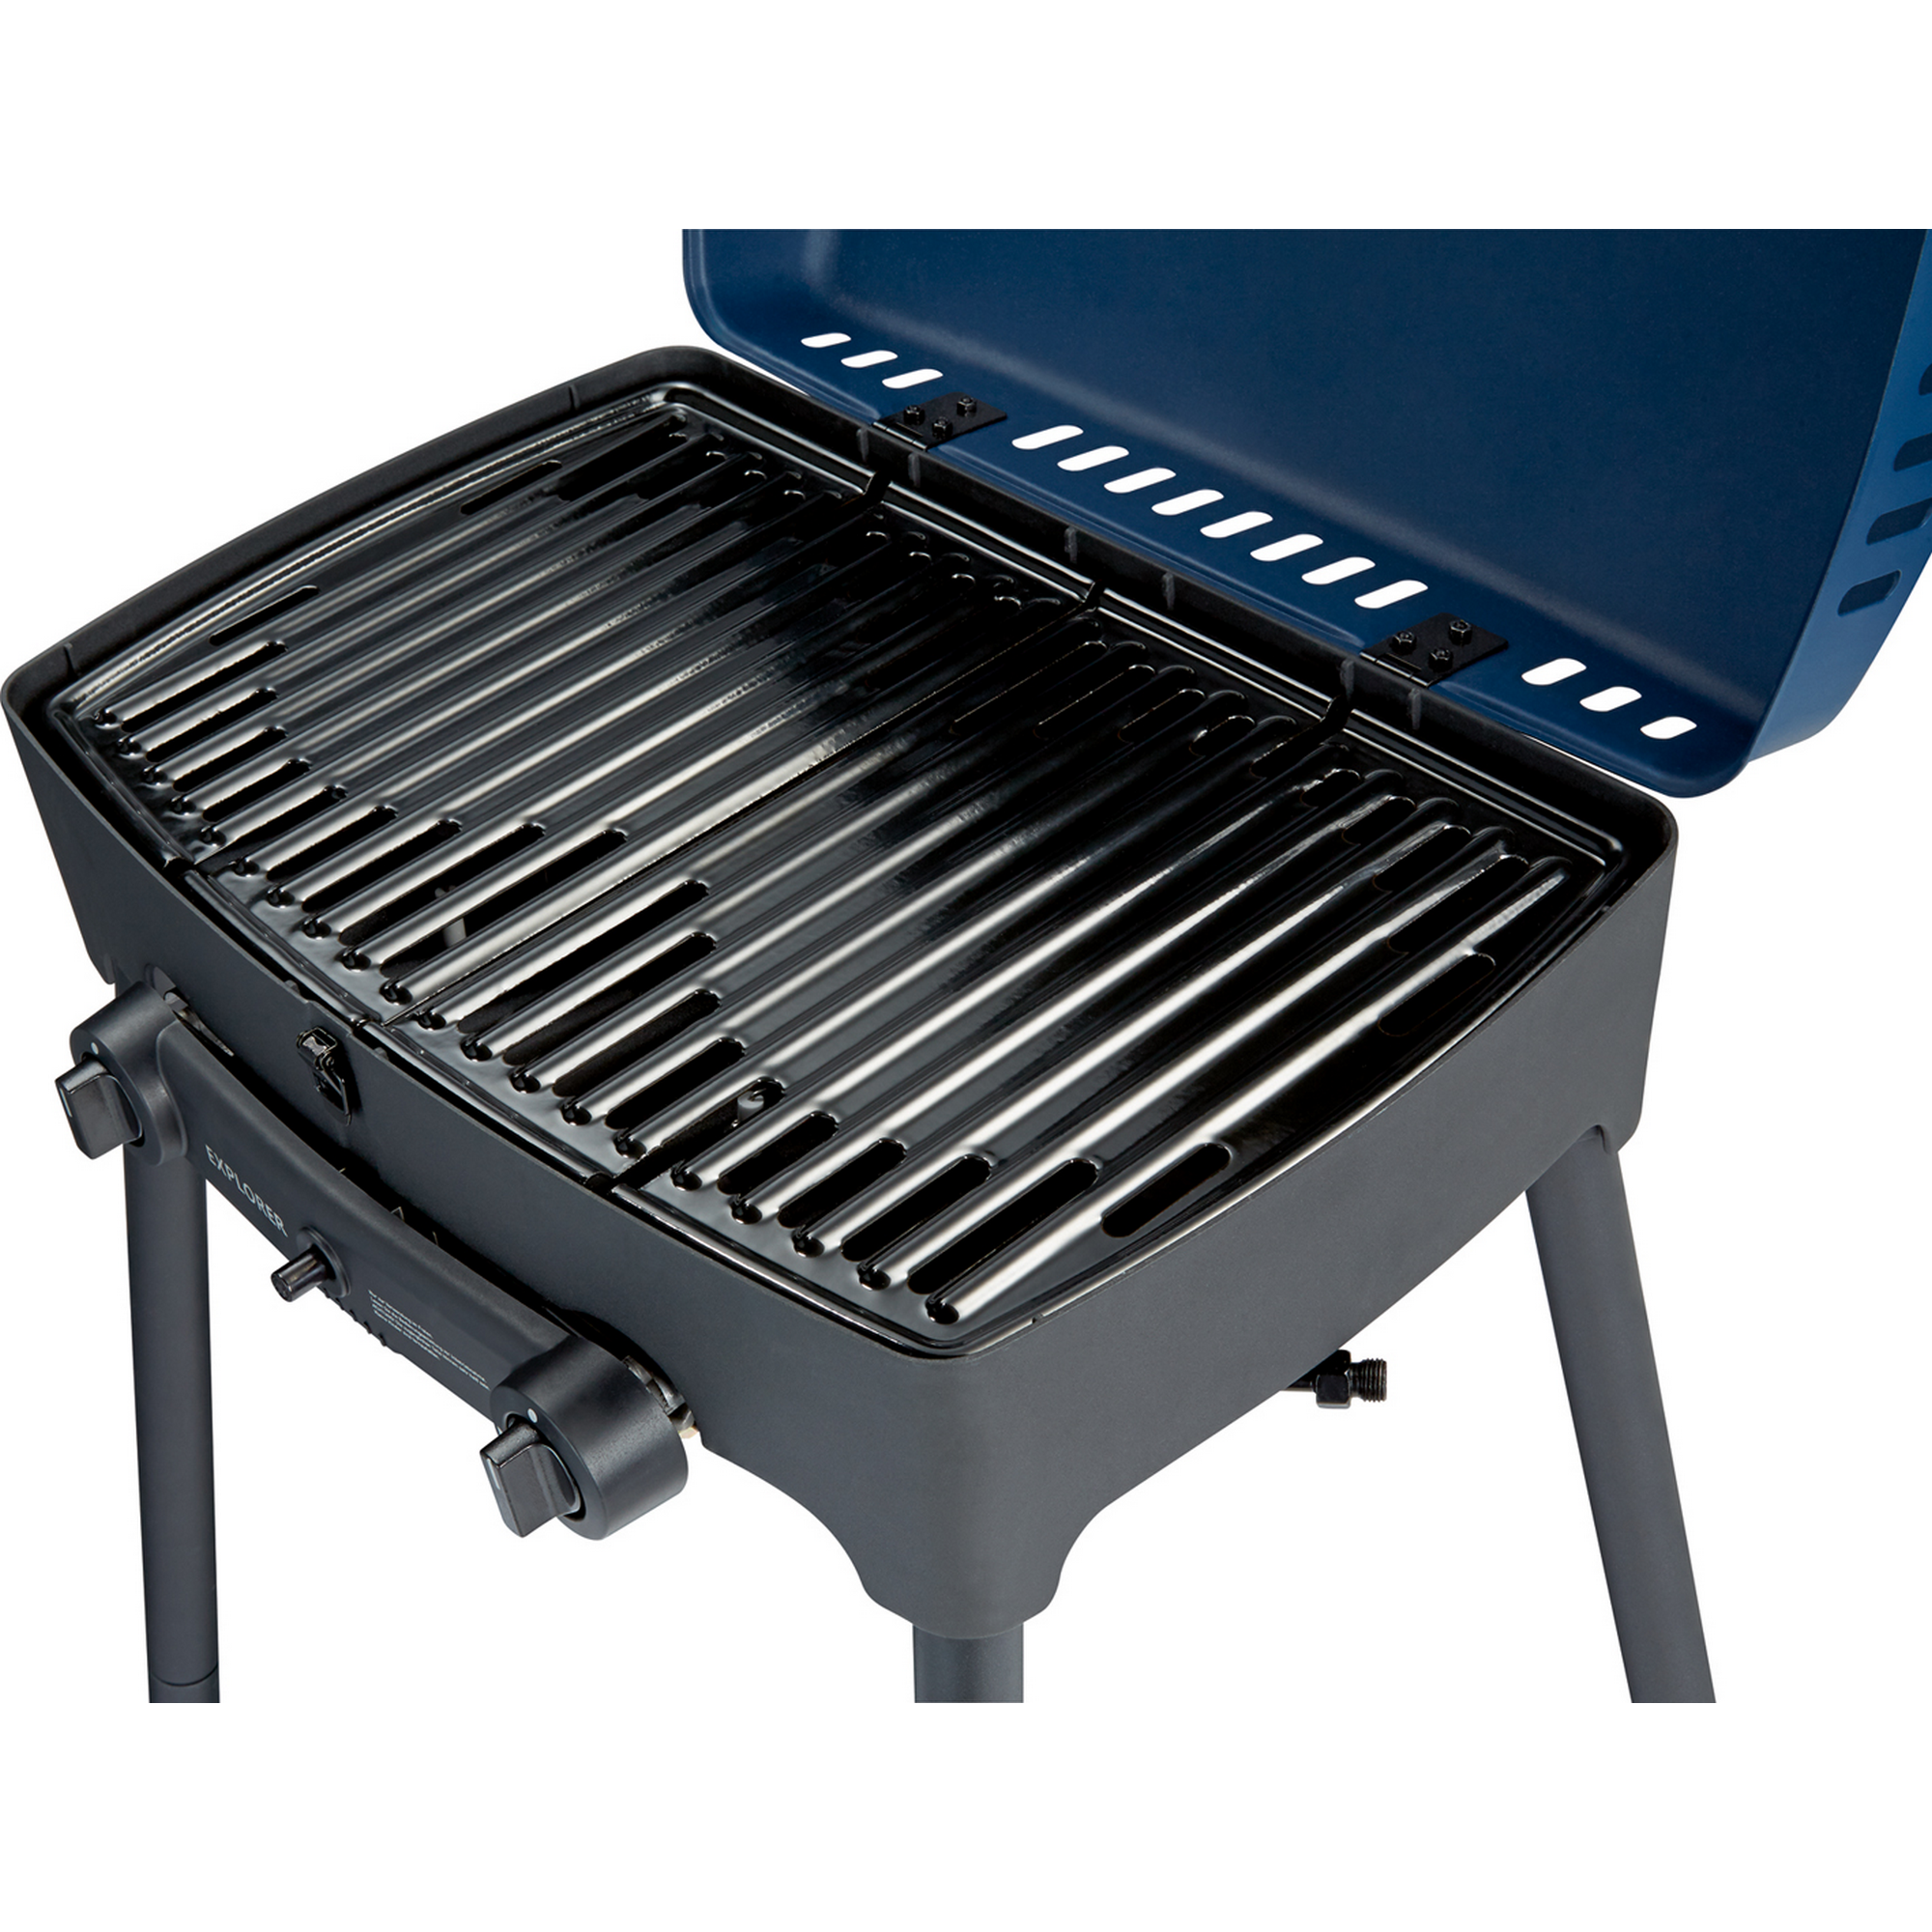 Enders Campinggrill Explorer + product picture